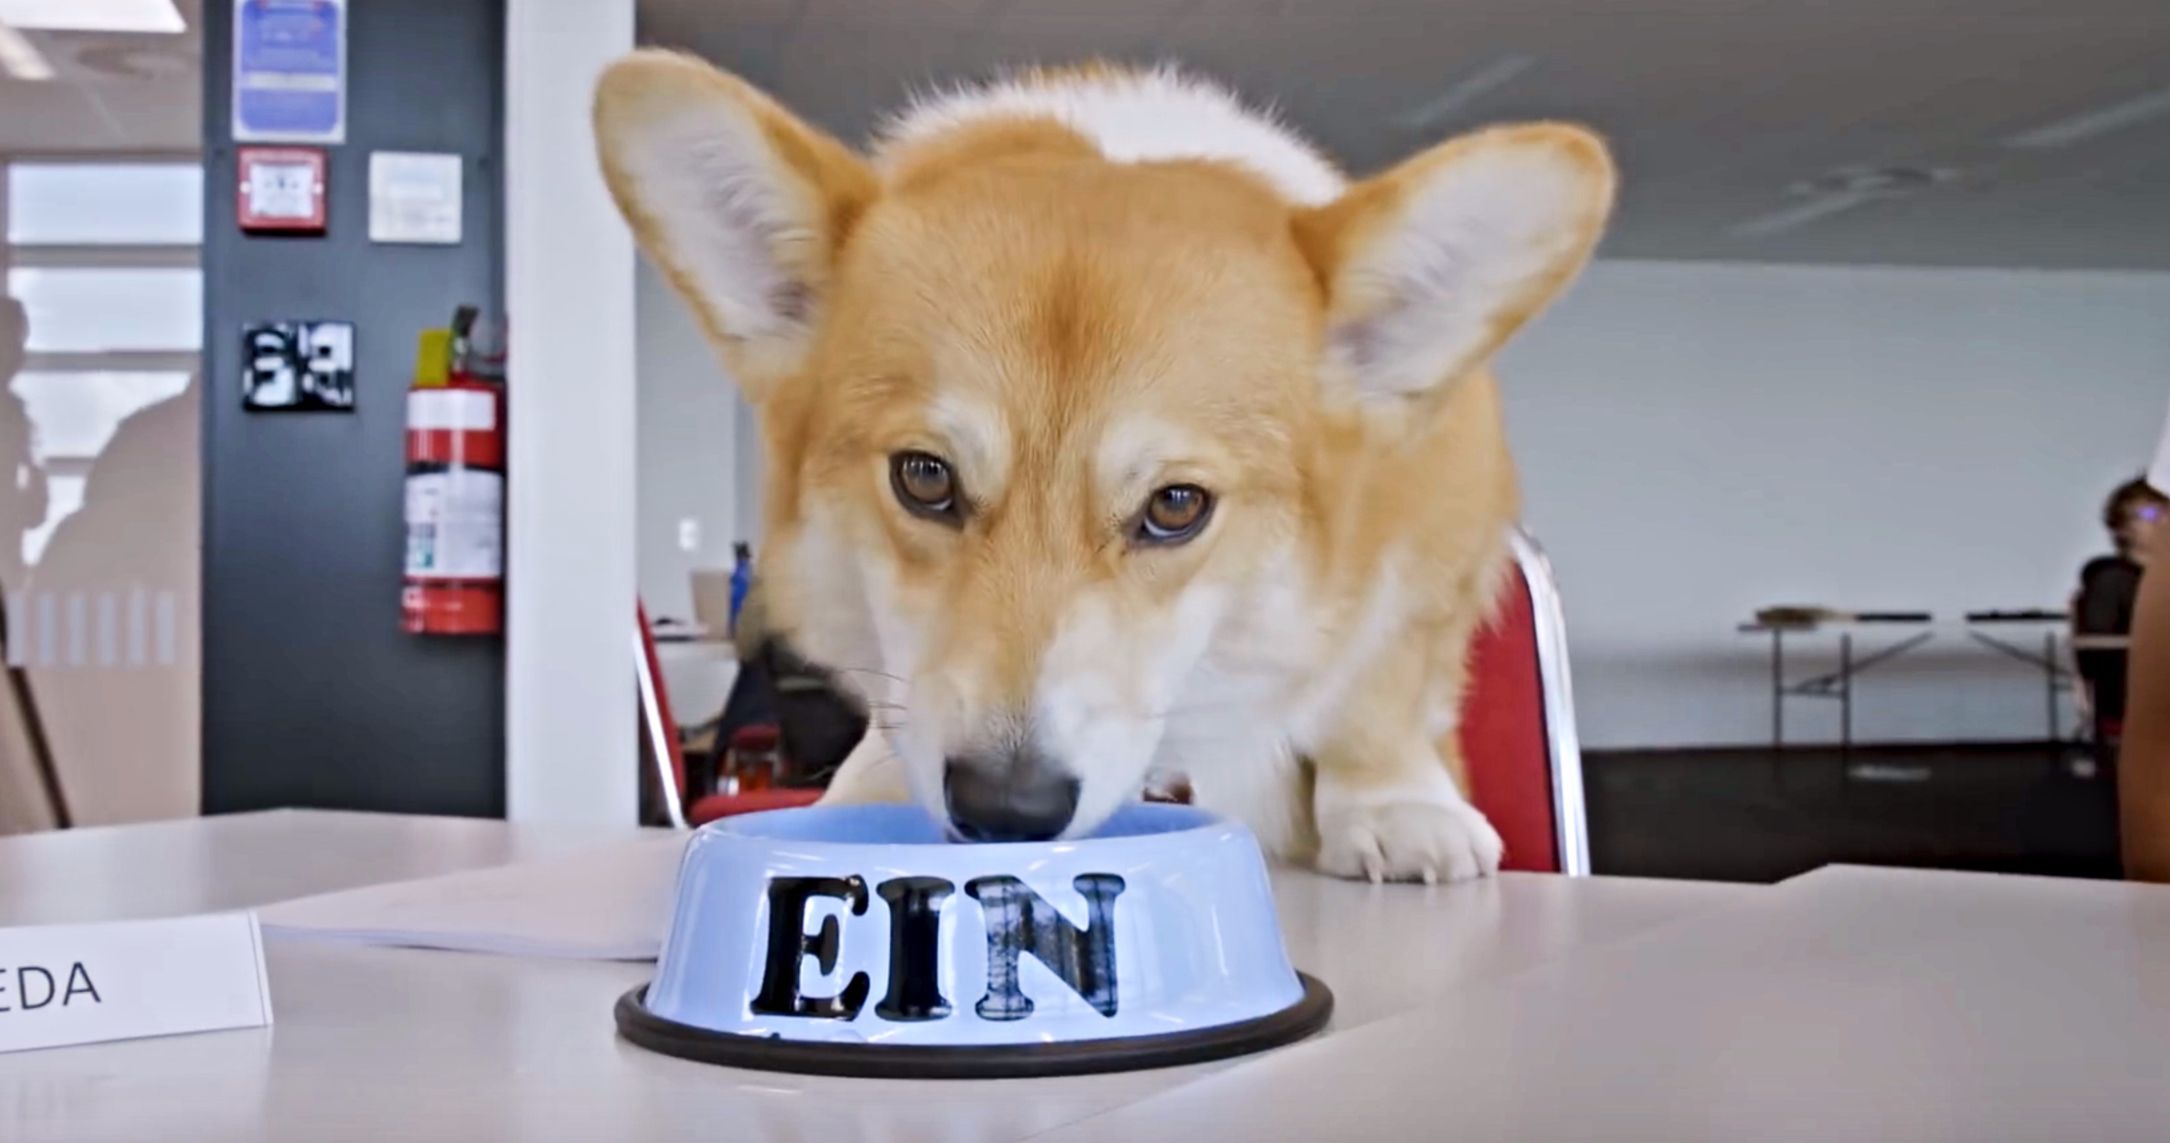 Netflix's Cowboy Bebop First Look Video Goes On Set with Ein the Dog